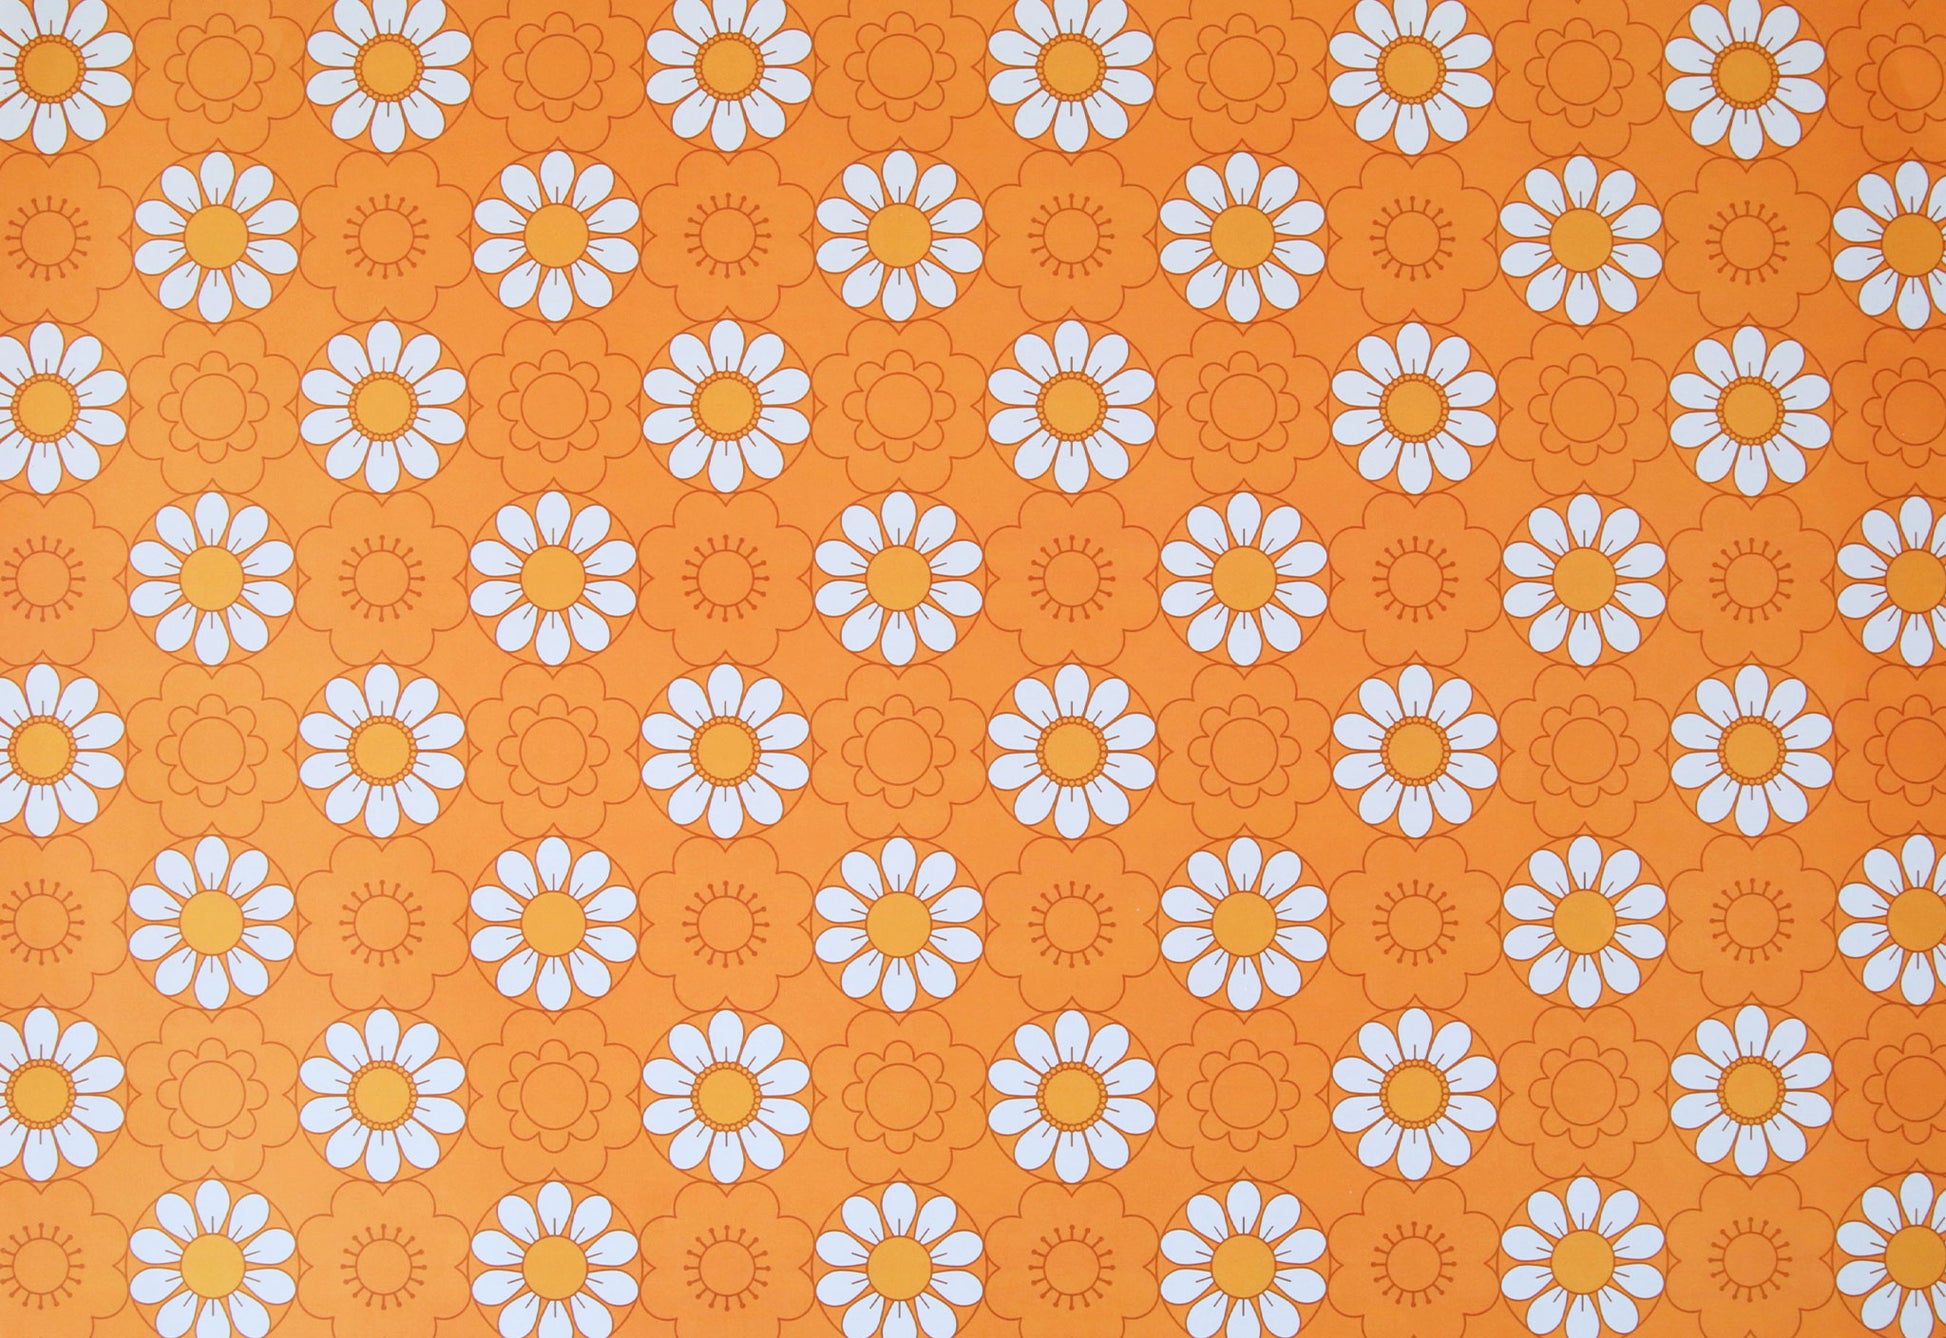 A single sheet of gift wrap with reversible sides. One side features a daisy print on a mustard yellow background while the other side features the same print on an orange background.